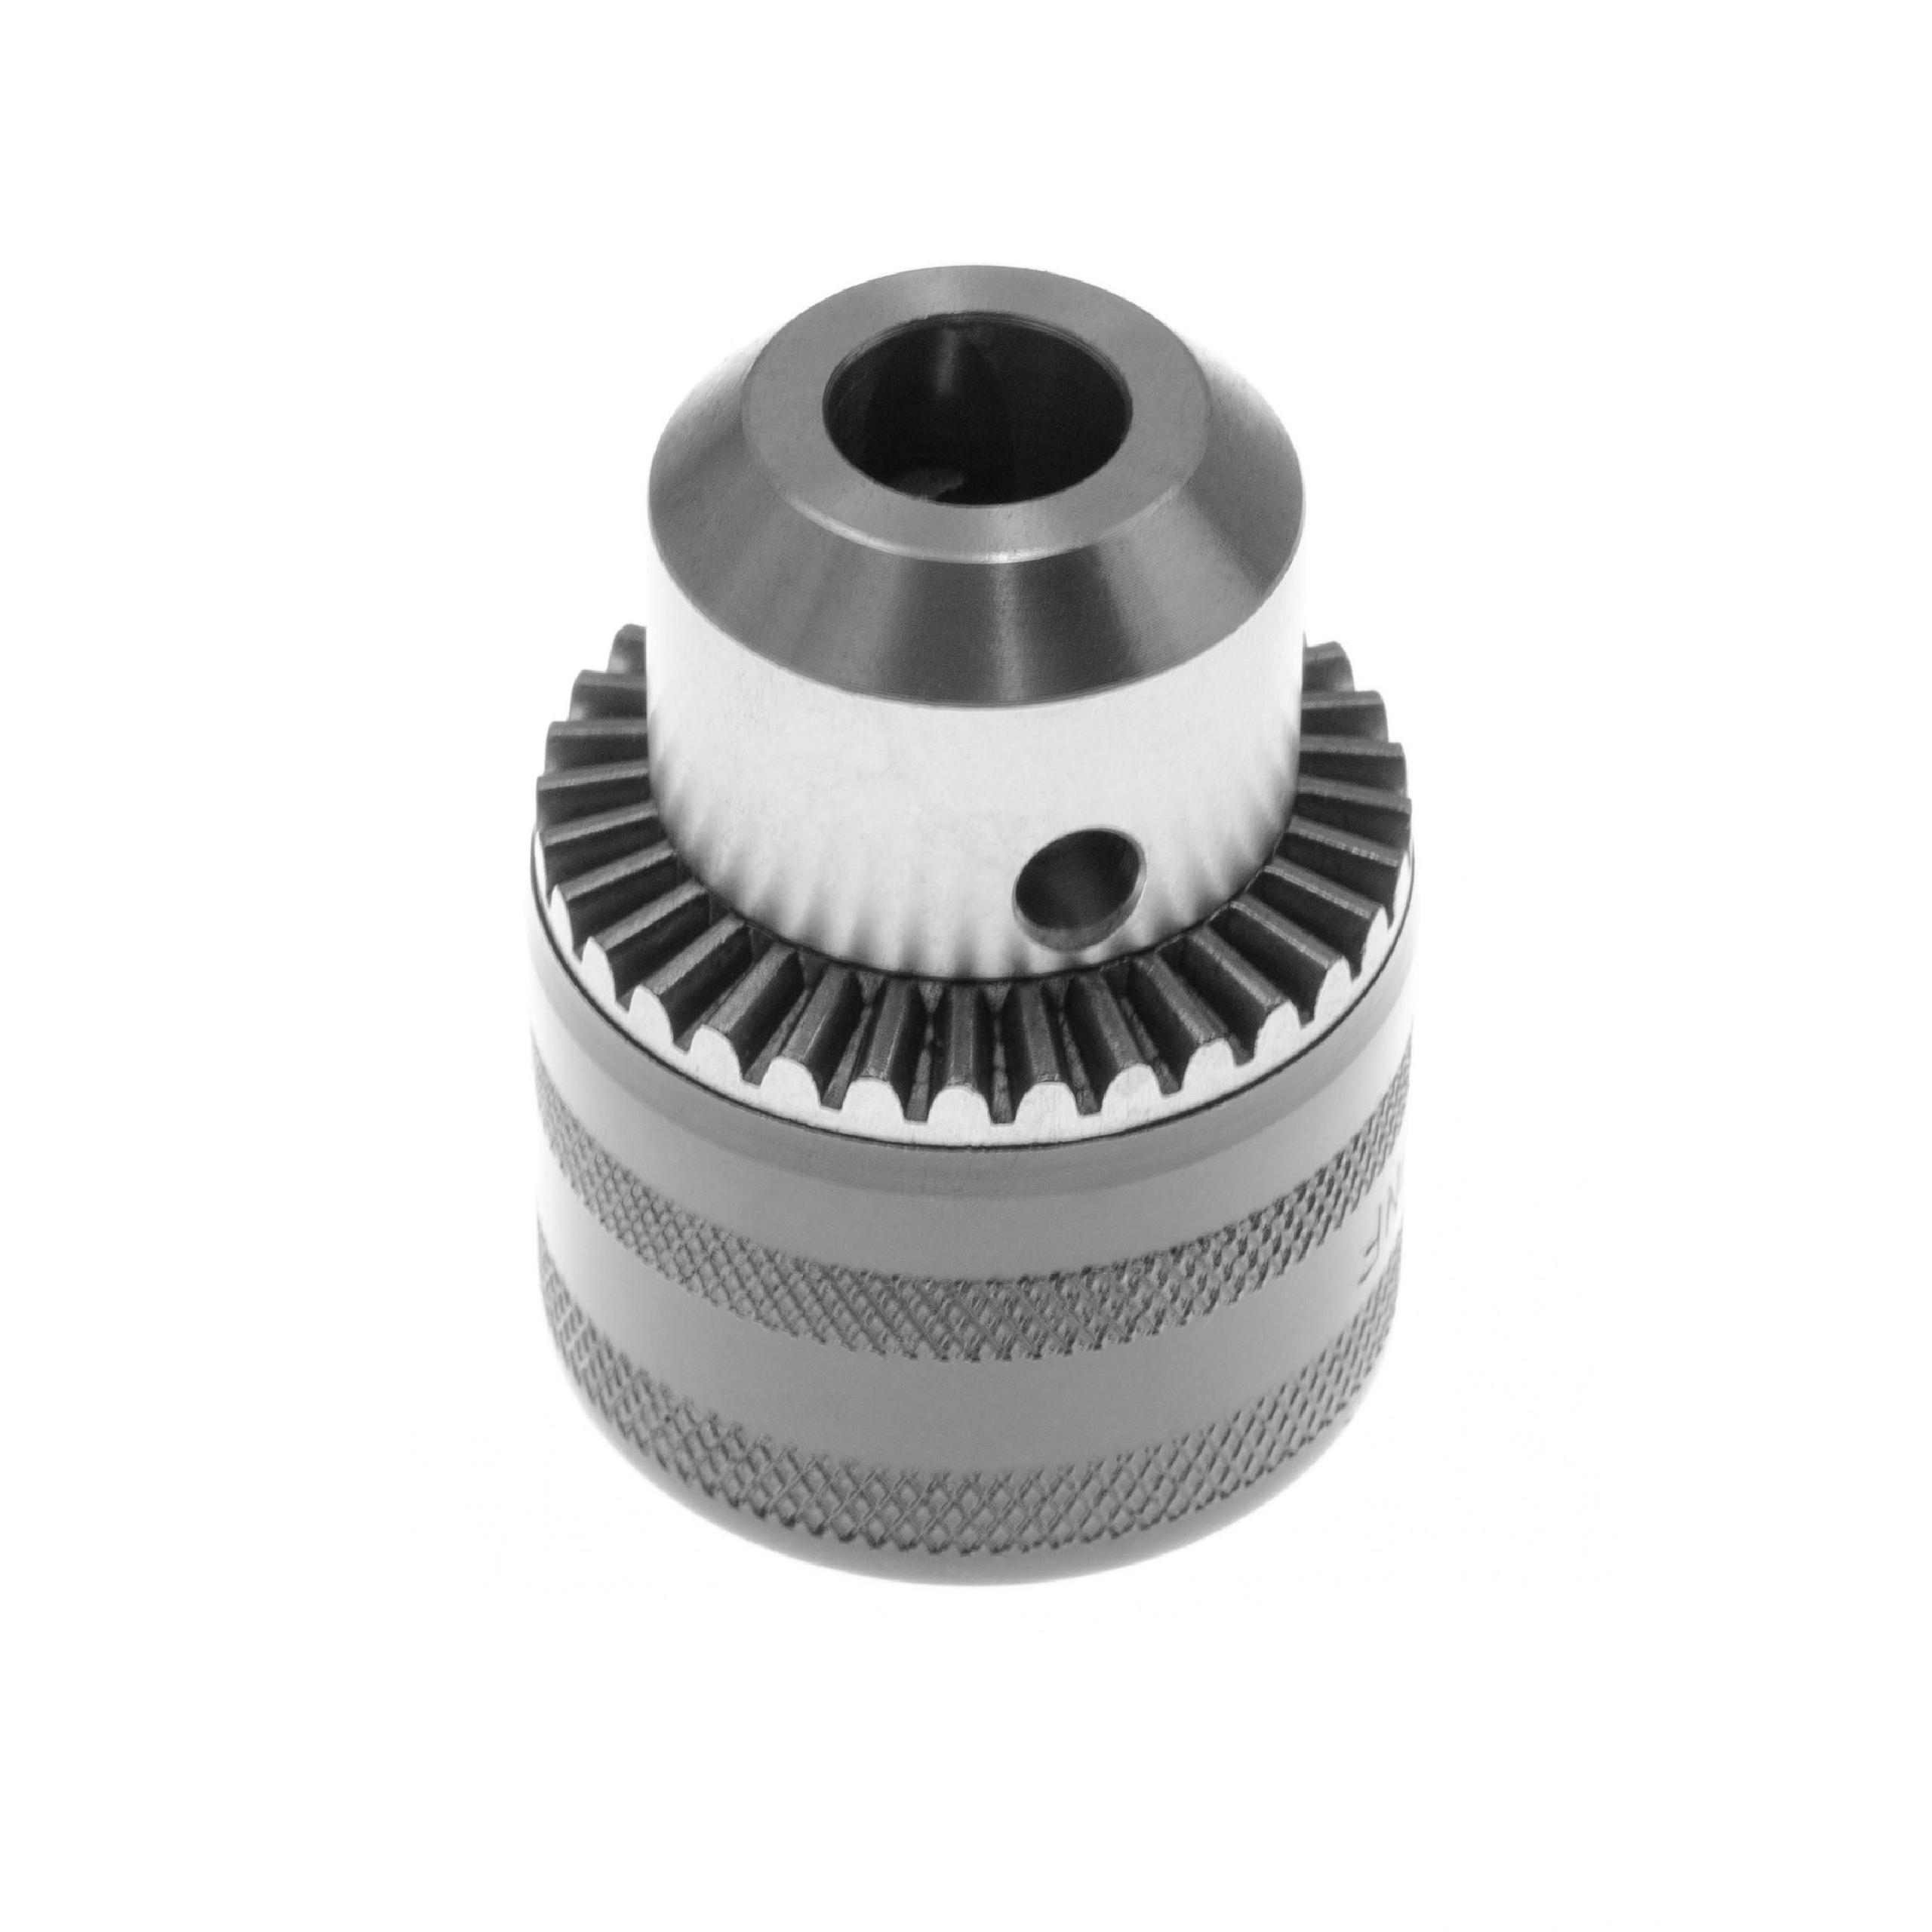 Clamping Chuck Jaw Adapter suitable for Universal AEG Electric Screwdriver Drill, Hammer Drill - 1.5 